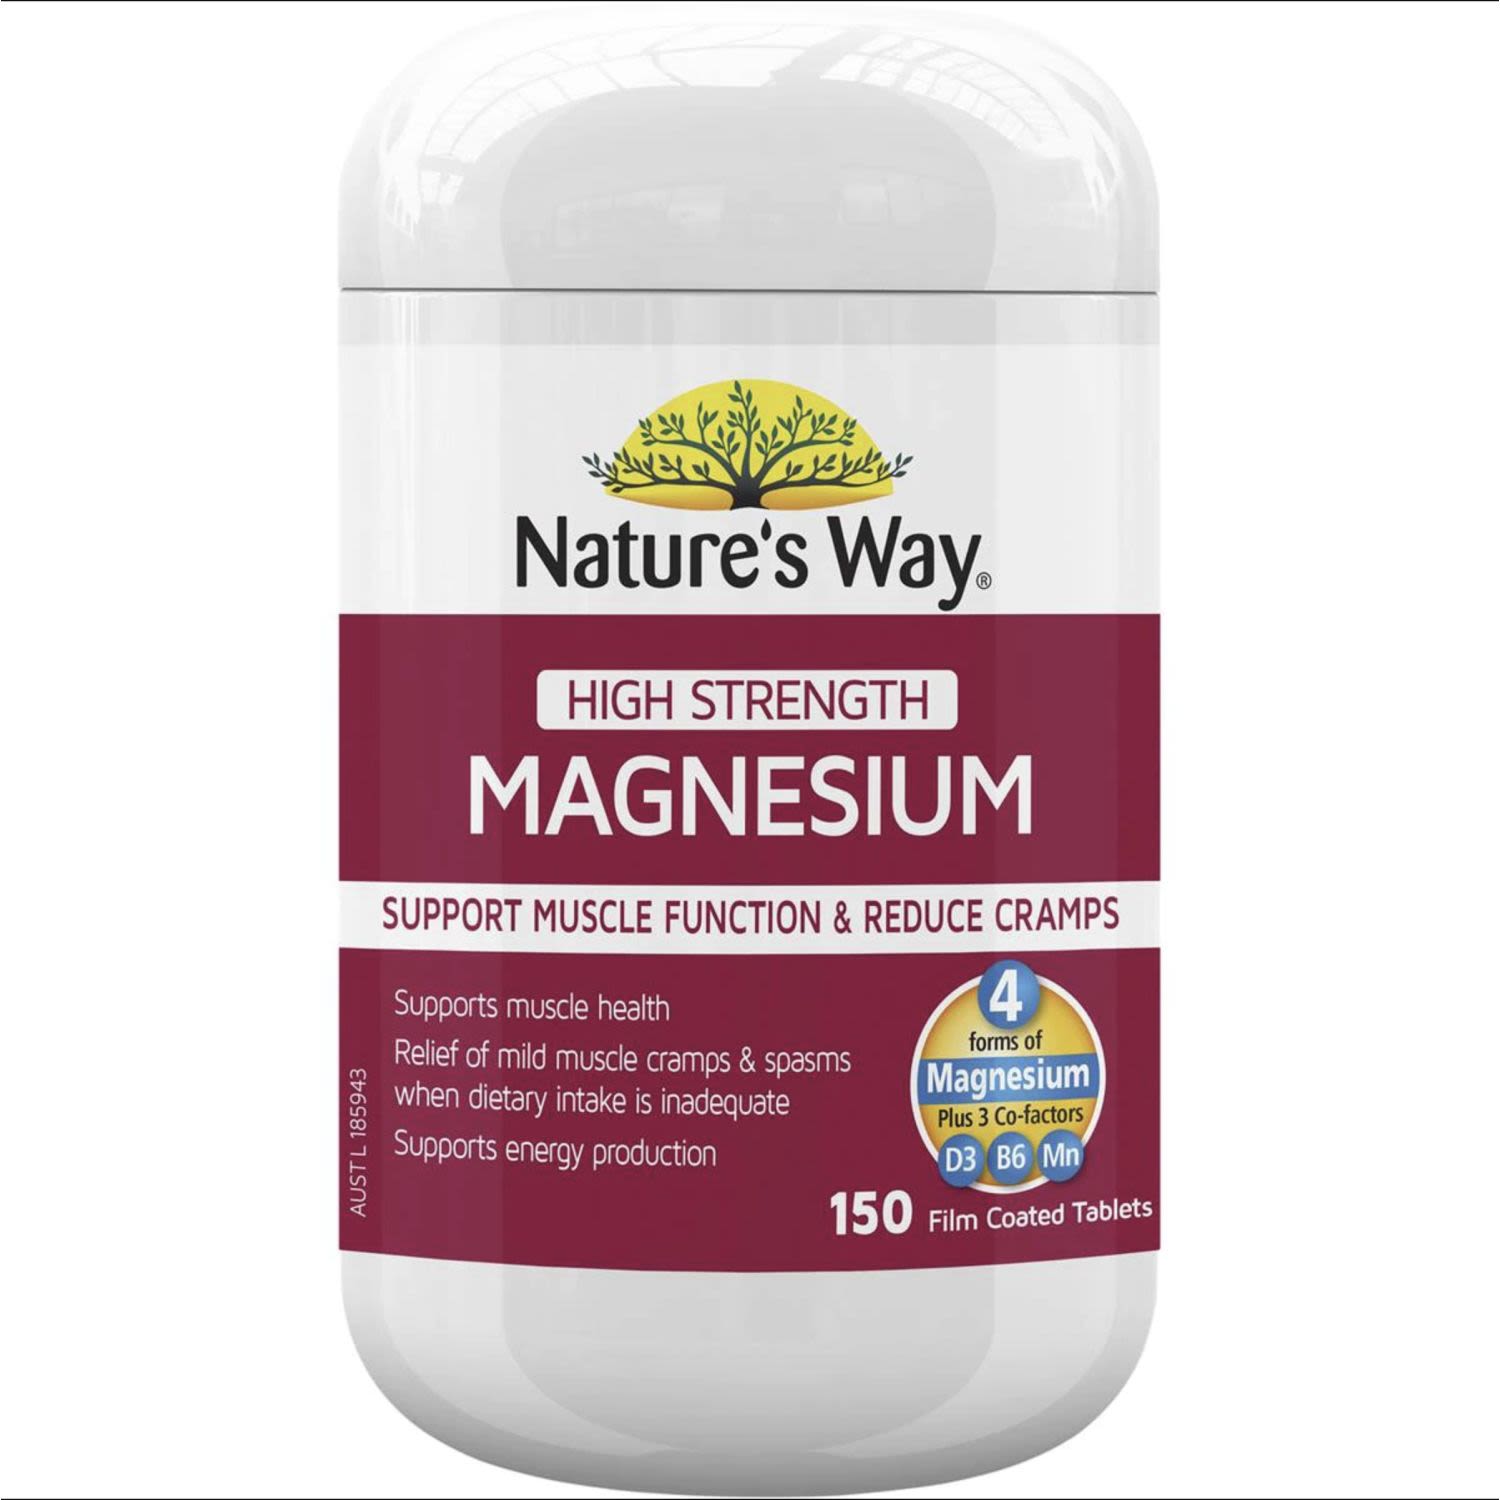 Nature's Way Magnesium Tablets, 150 Each